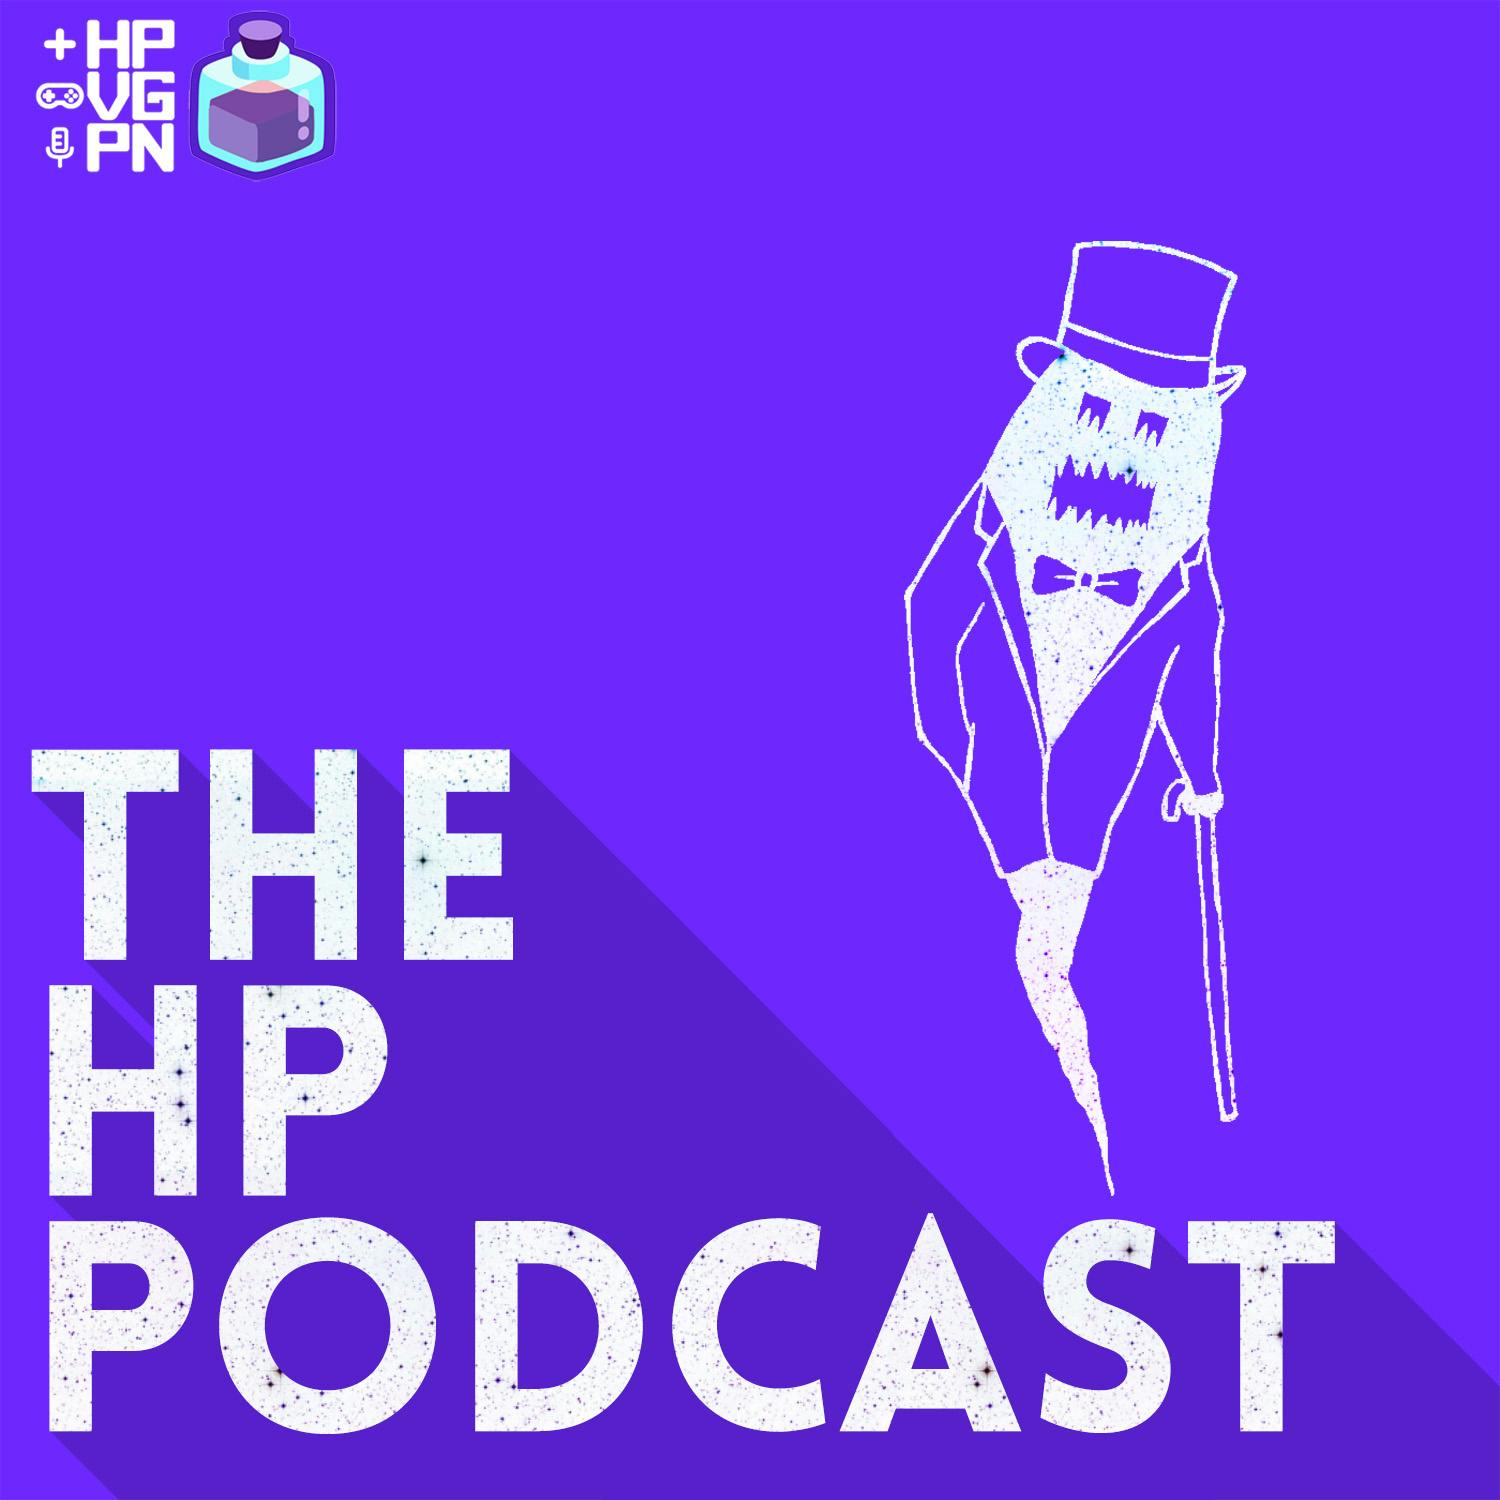 The Switch Pro Could Be Real- The HP Podcast Episode 112